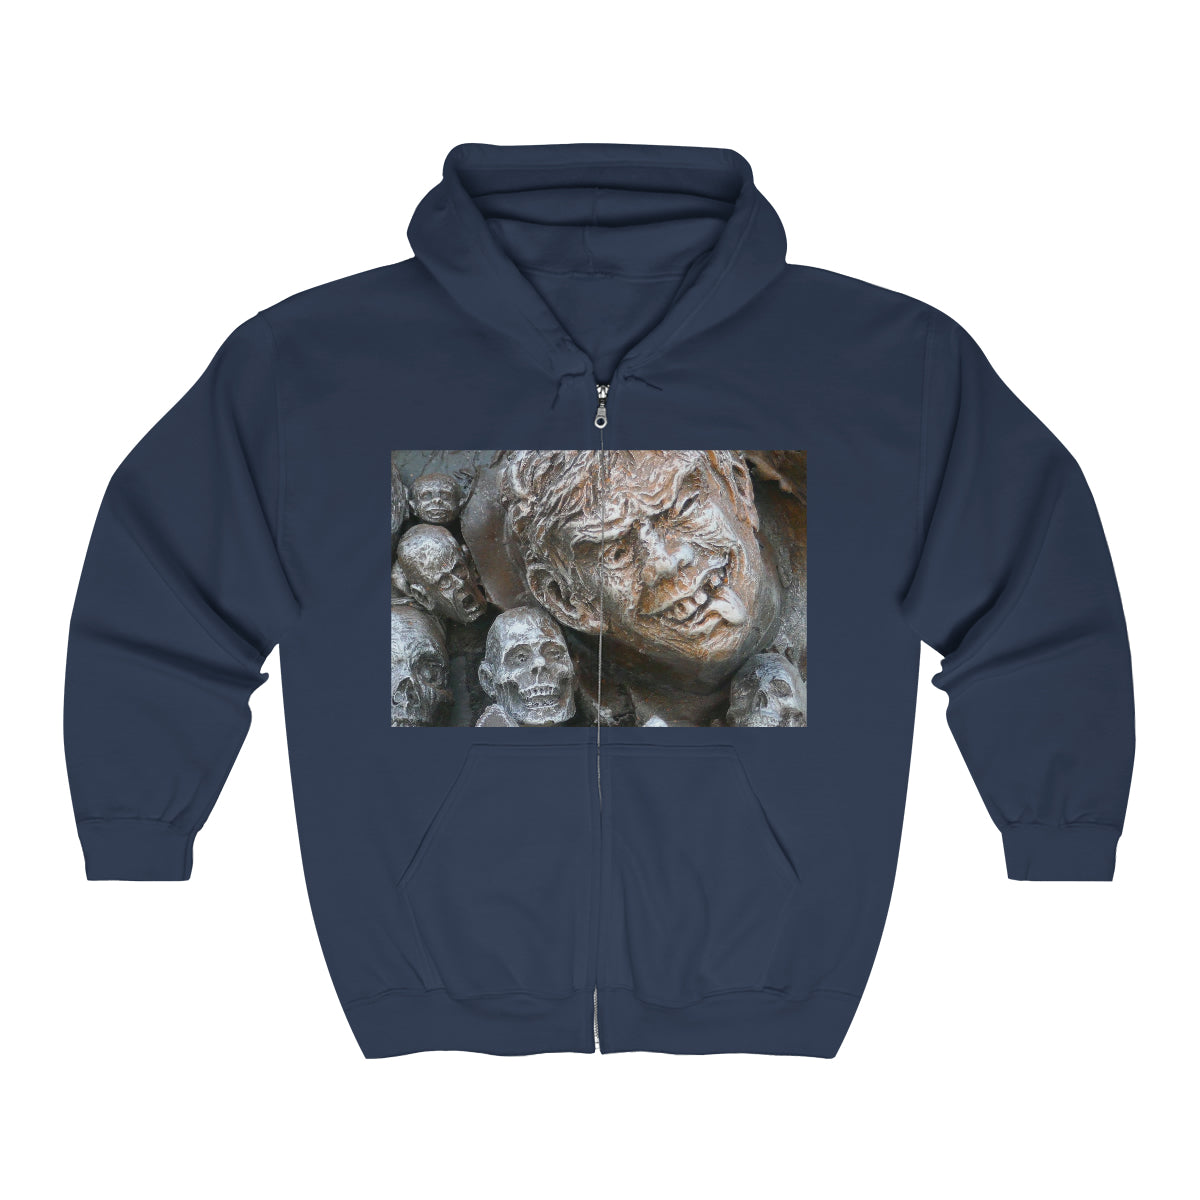 Waiting for the King - Unisex Heavy Blend Full Zip Hooded Sweatshirt - Fry1Productions